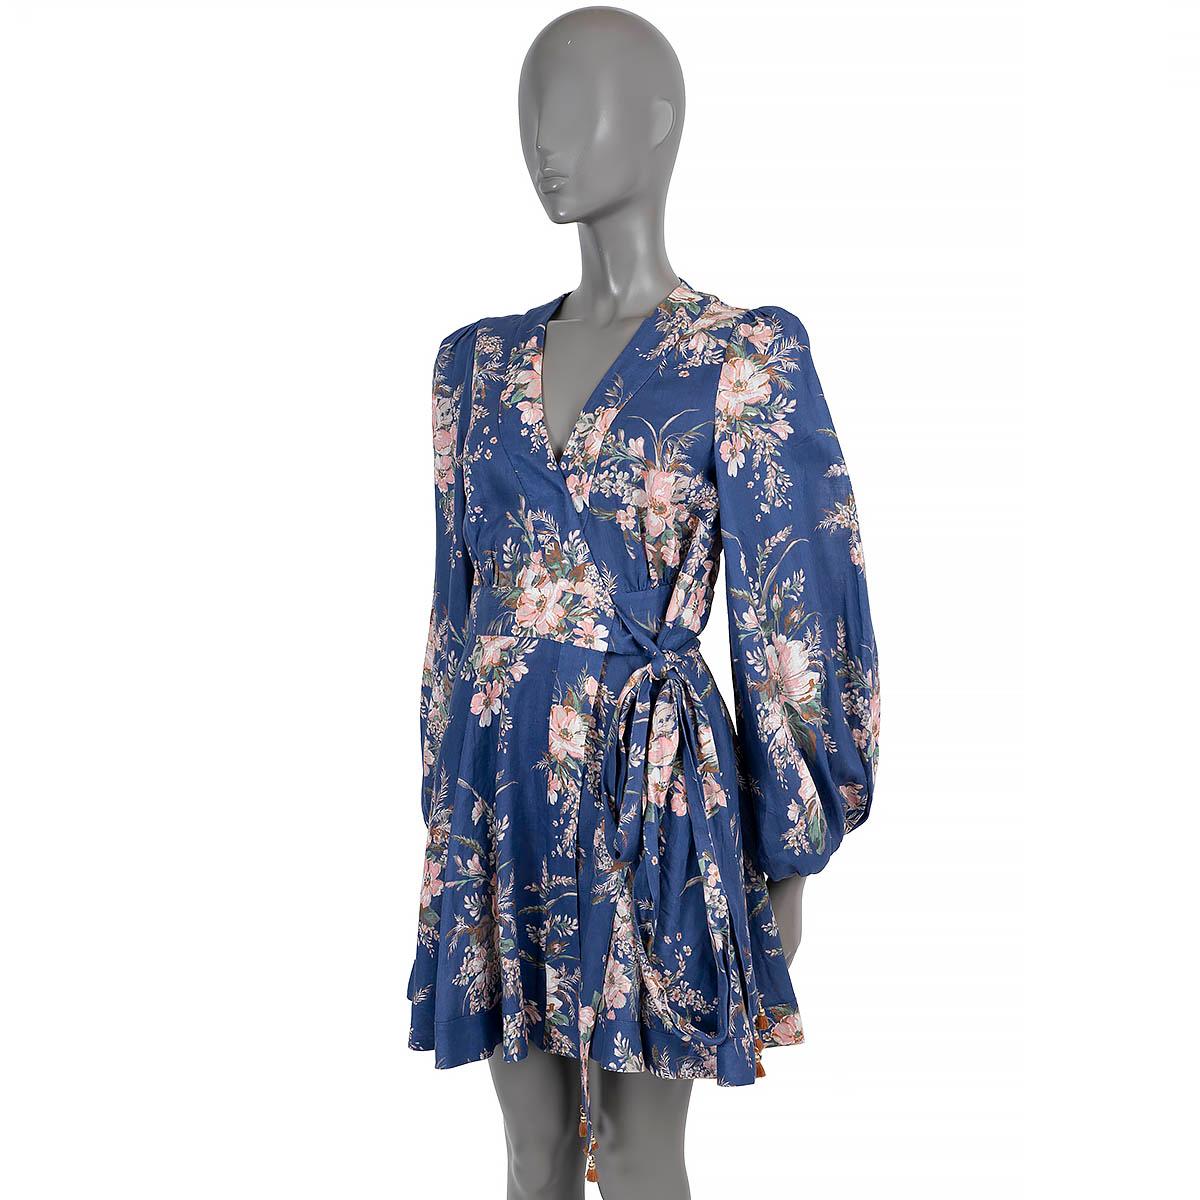 100% authentic Zimmermann moonshine floral wrap dress in  purple, pink, white, green and brown linen (100%). Features a fit and flare silhouette and balloon sleeves. Unlined. Has been worn and is in excellent condition. 

Measurements
Tag